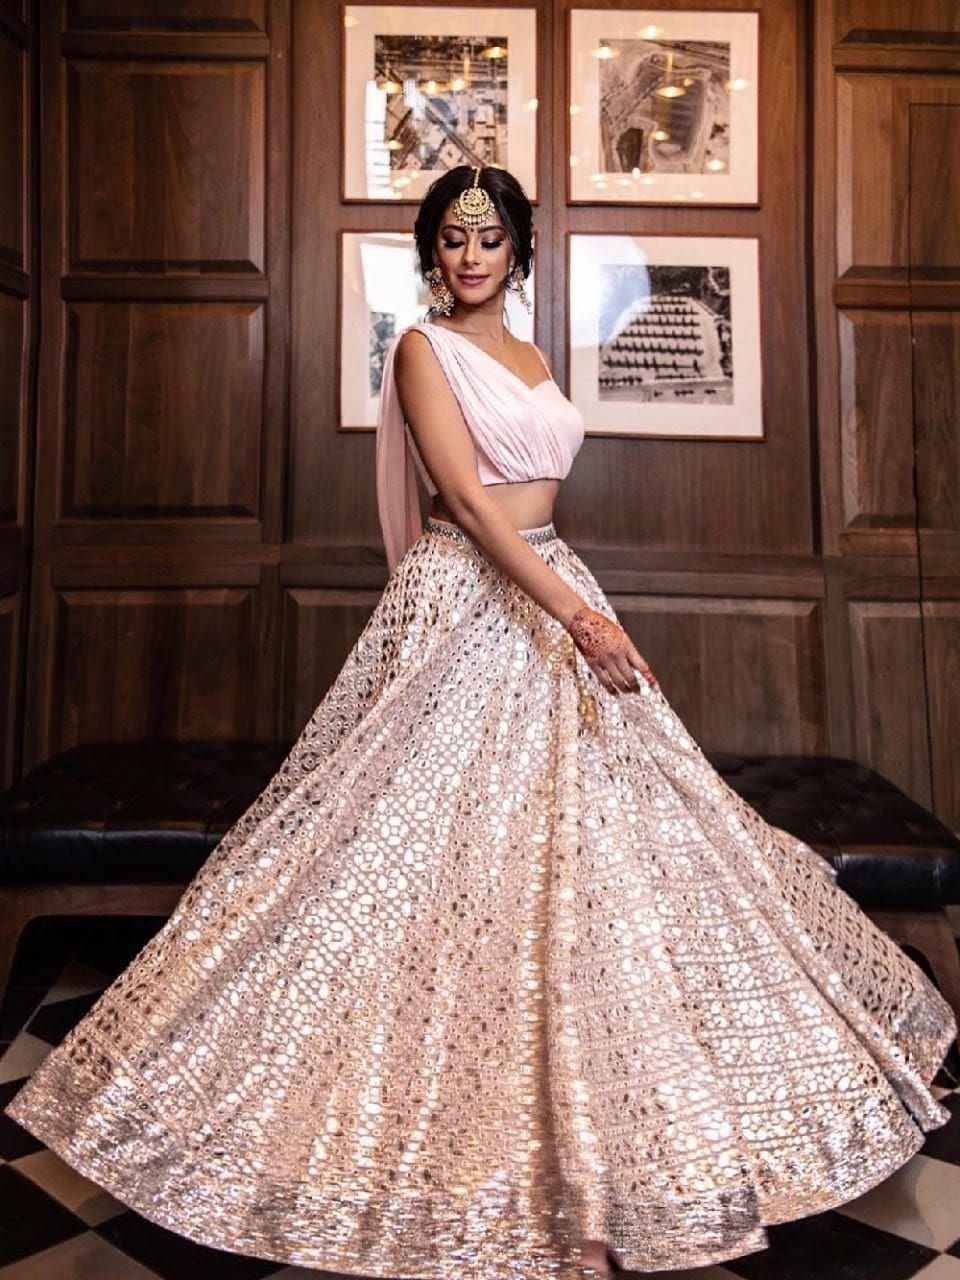 Crop Top Lehenga Trends That You Should Keep An Eye Out For